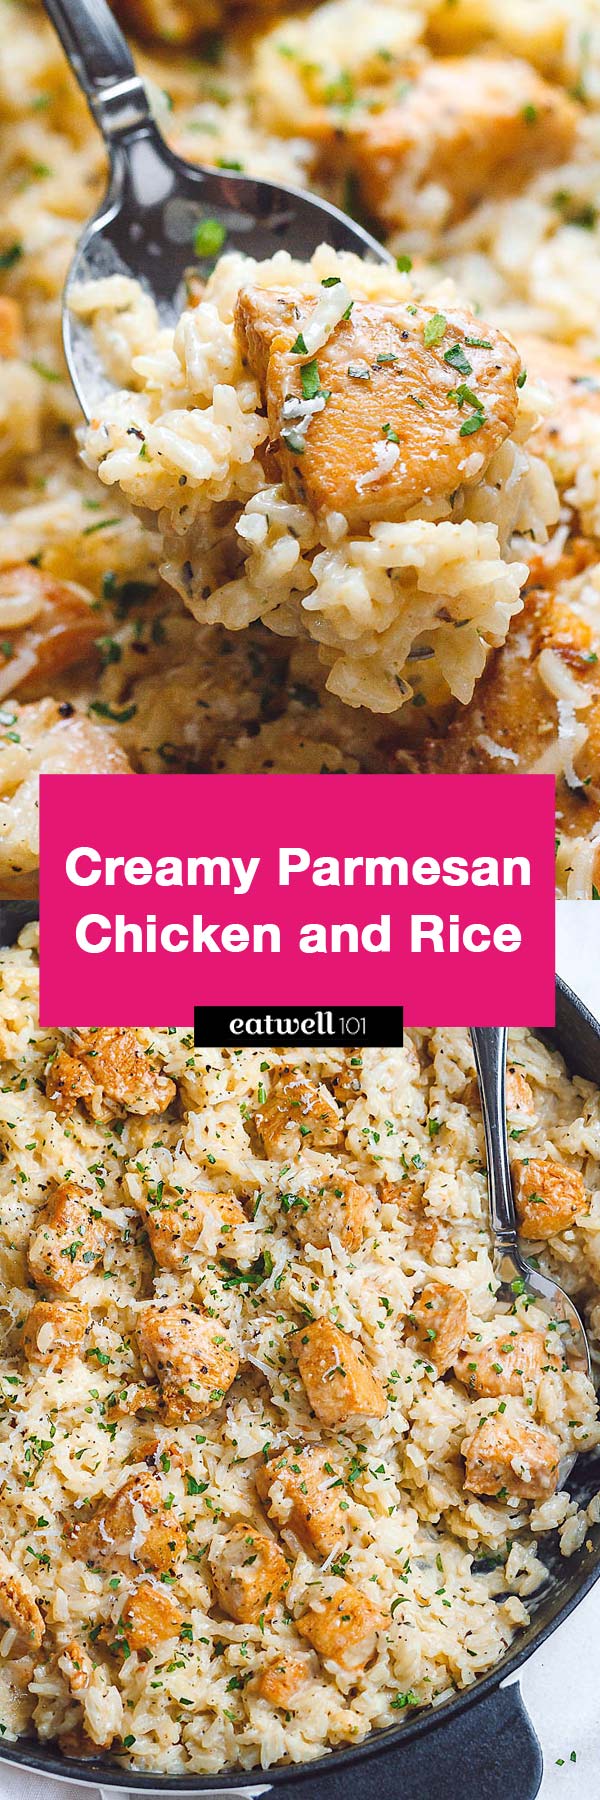 One-Pan Creamy Parmesan Chicken and Rice - #chicken #recipe #recipe #eatwell101 - Delicious, creamy, cheesy chicken and rice made in one pan to nourish your body and please your palate.